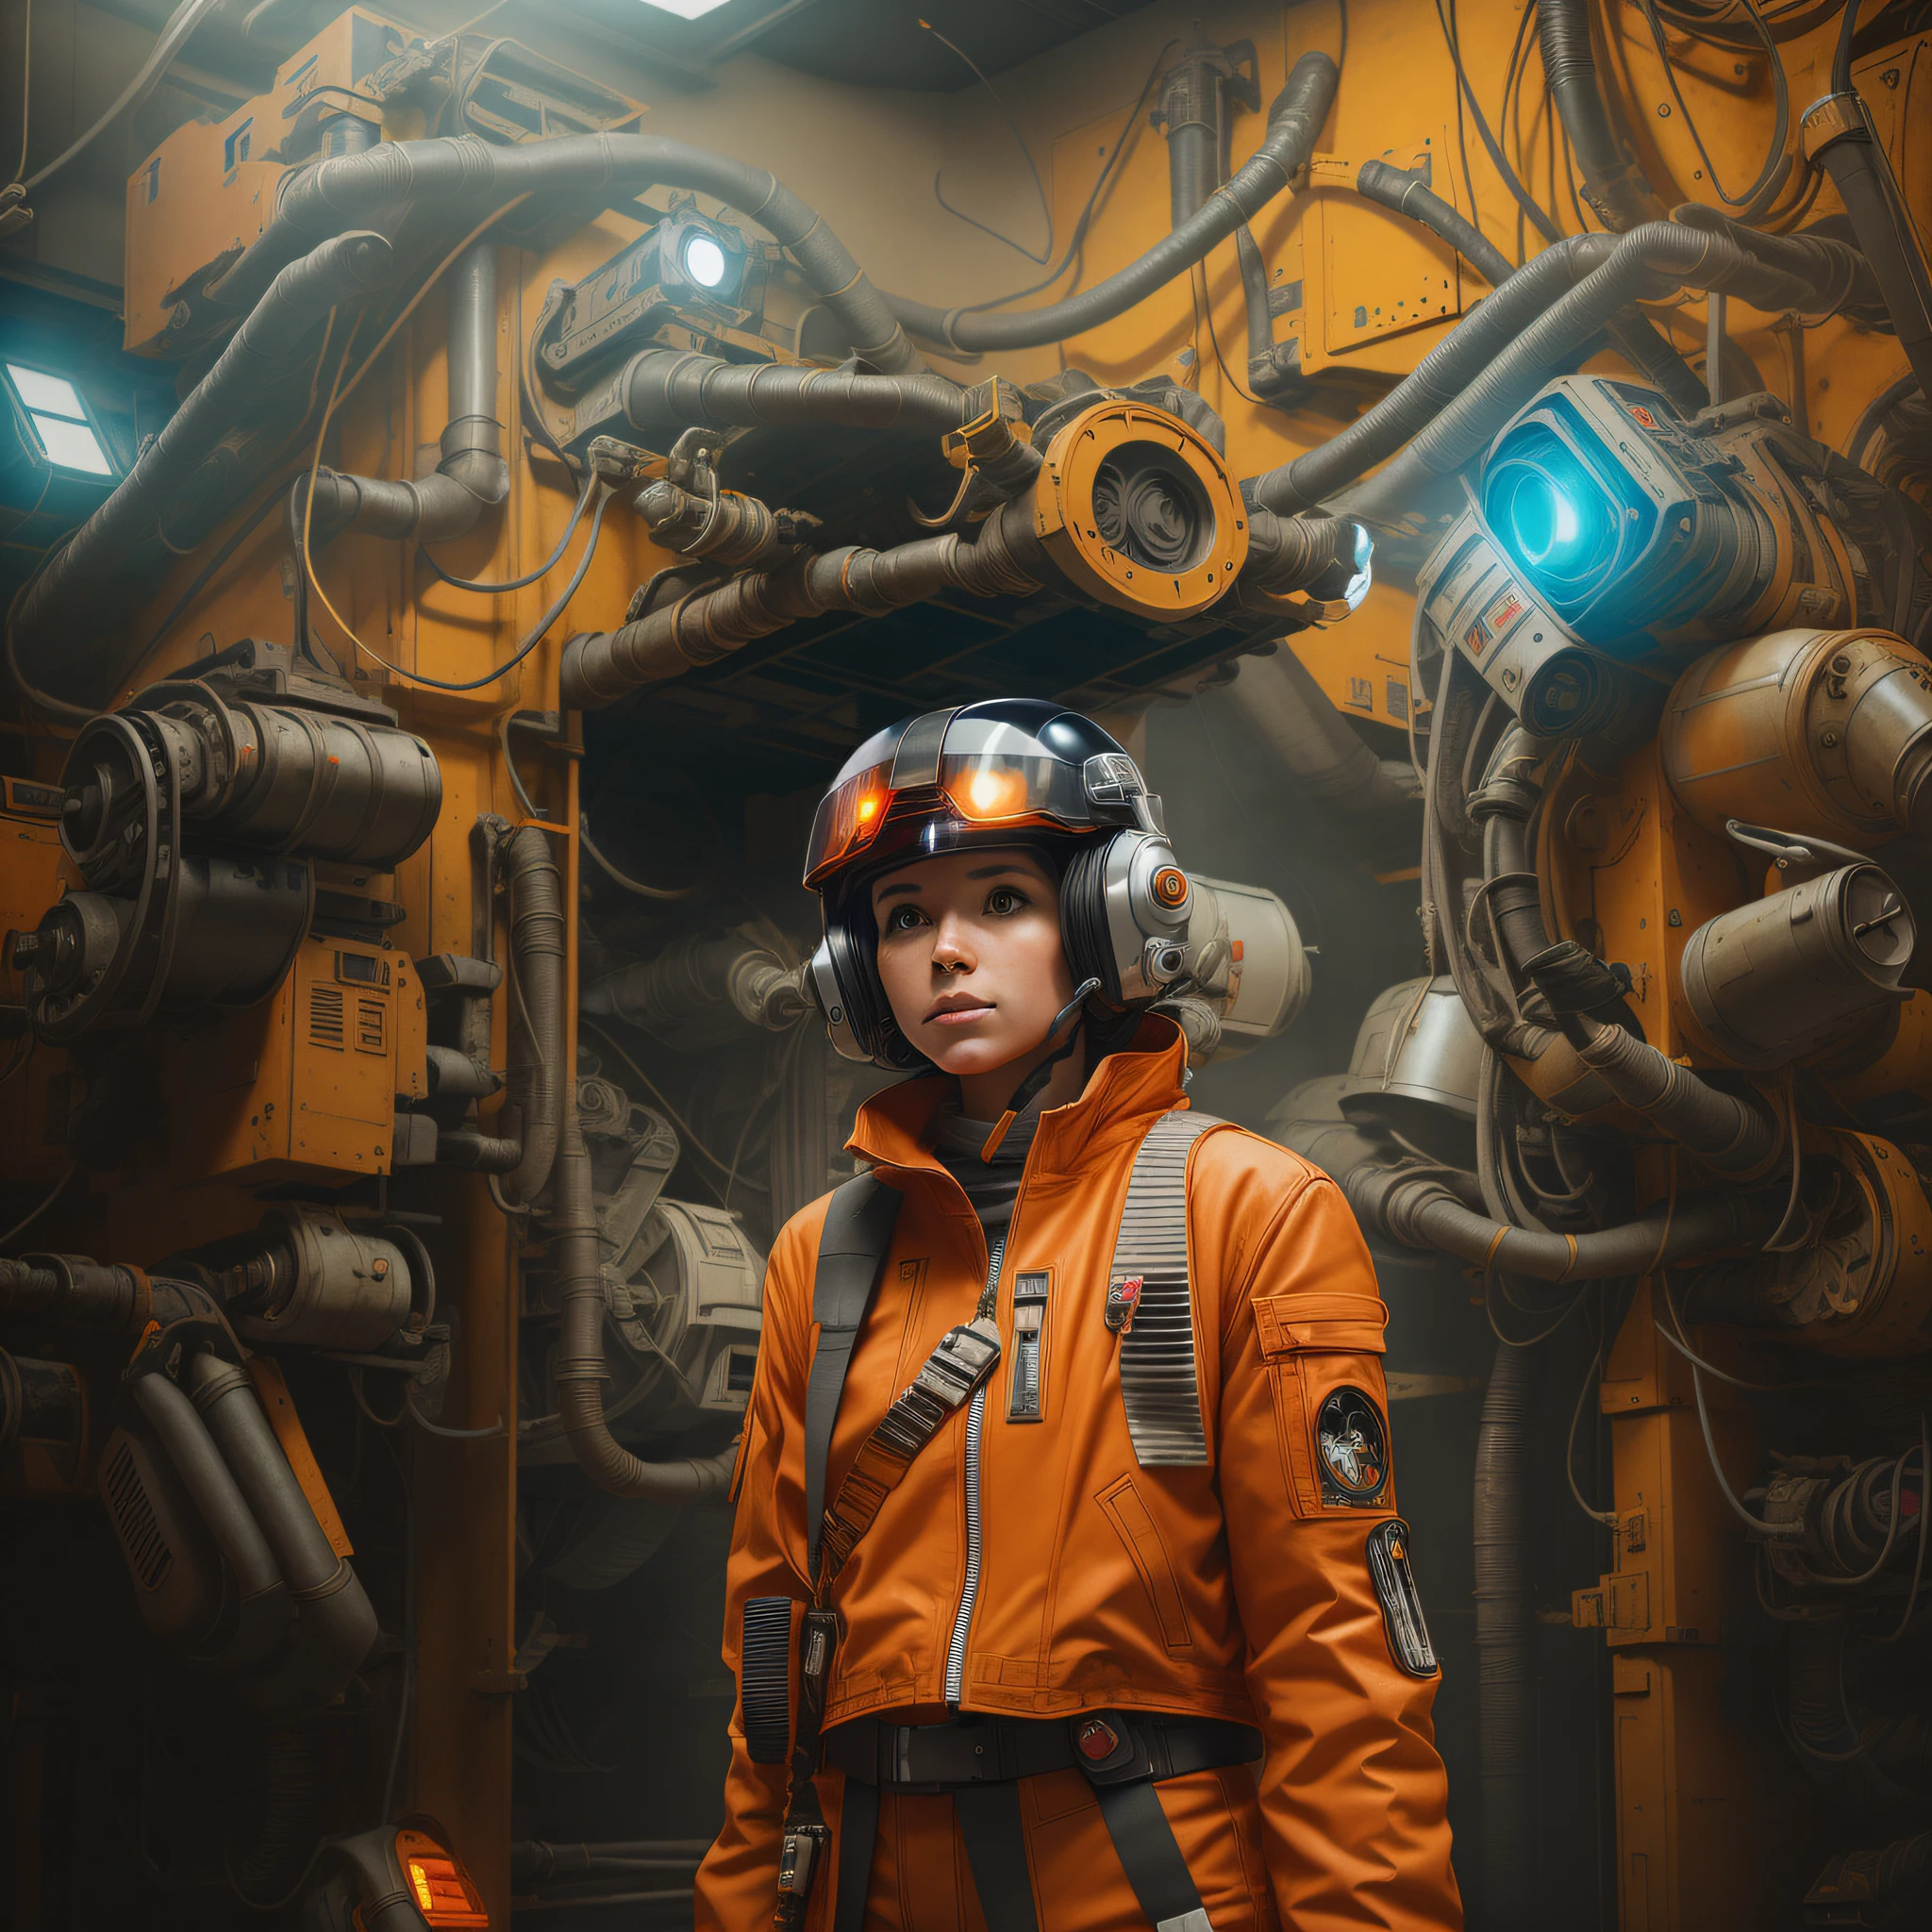 there is a woman X-wing pilot in an orange jacket and helmet standing in a room with lots of machinery, Star Wars art ultrarealistic 8k, cinematic look, portrait futuristic pilot girl, style hybrid mix of people, dreamy cyberpunk girl, girl in mecha cyber armor, portrait beautiful sci - fi girl, sci-fi movie